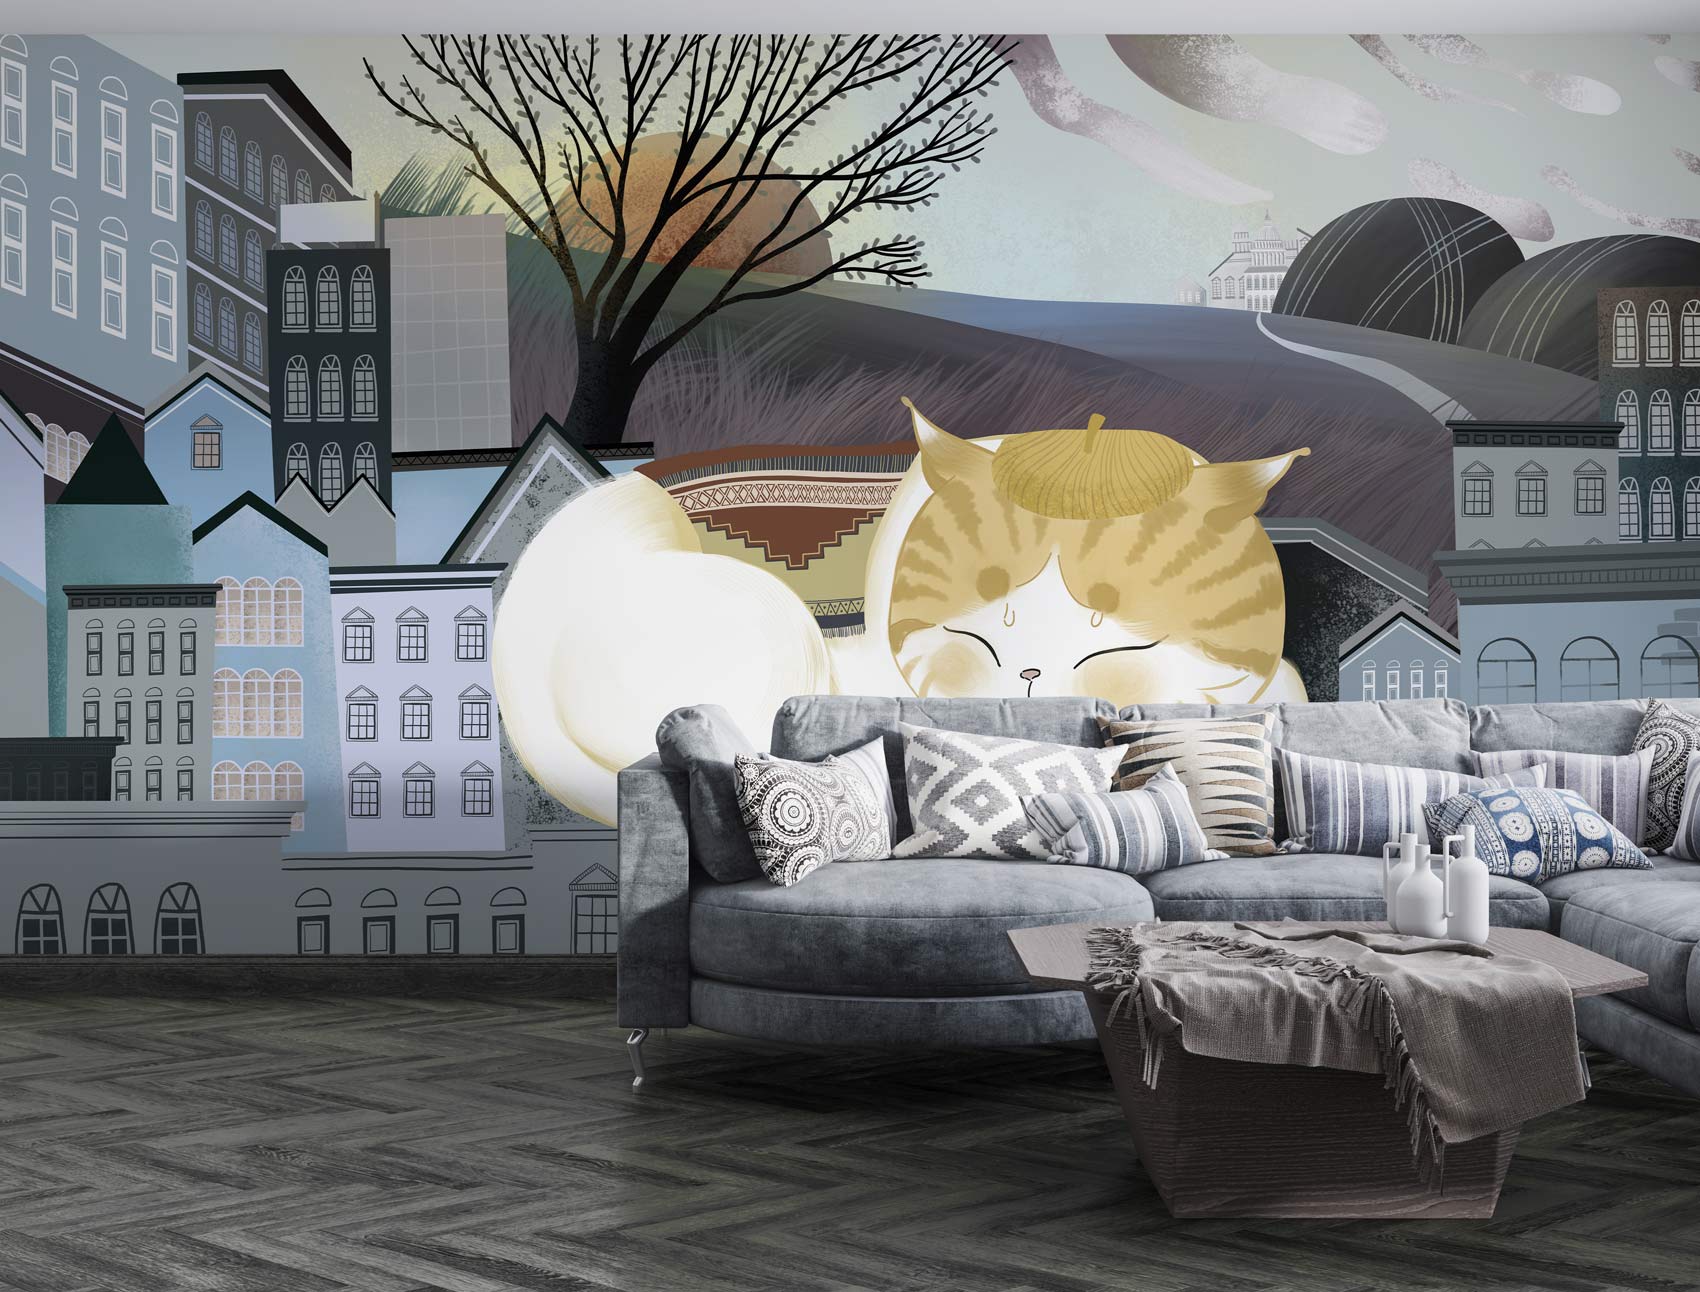 Huge Animal Wallpaper Mural of a Sleeping Cat, Perfect for Decorating Your Living Room